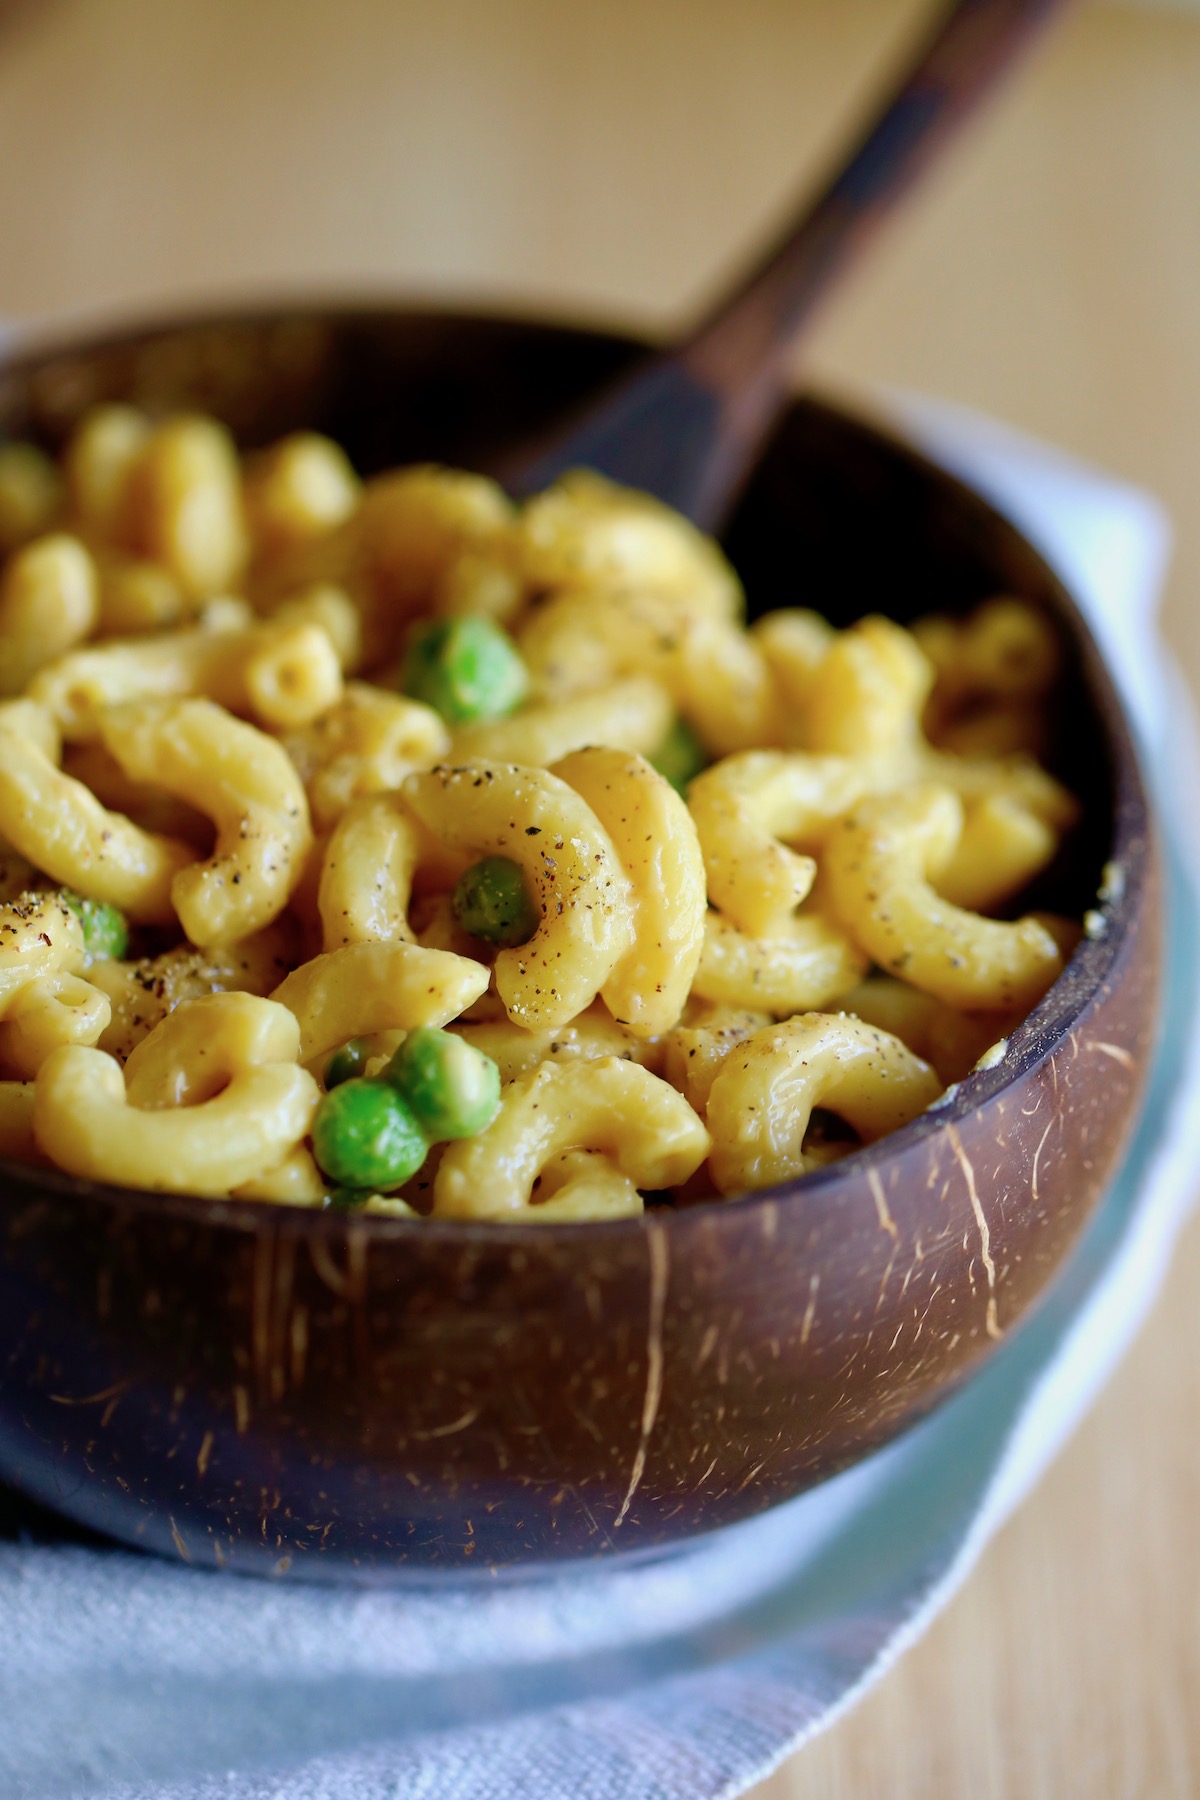 black pepper sprinkled over vegan mac and cheese with peas